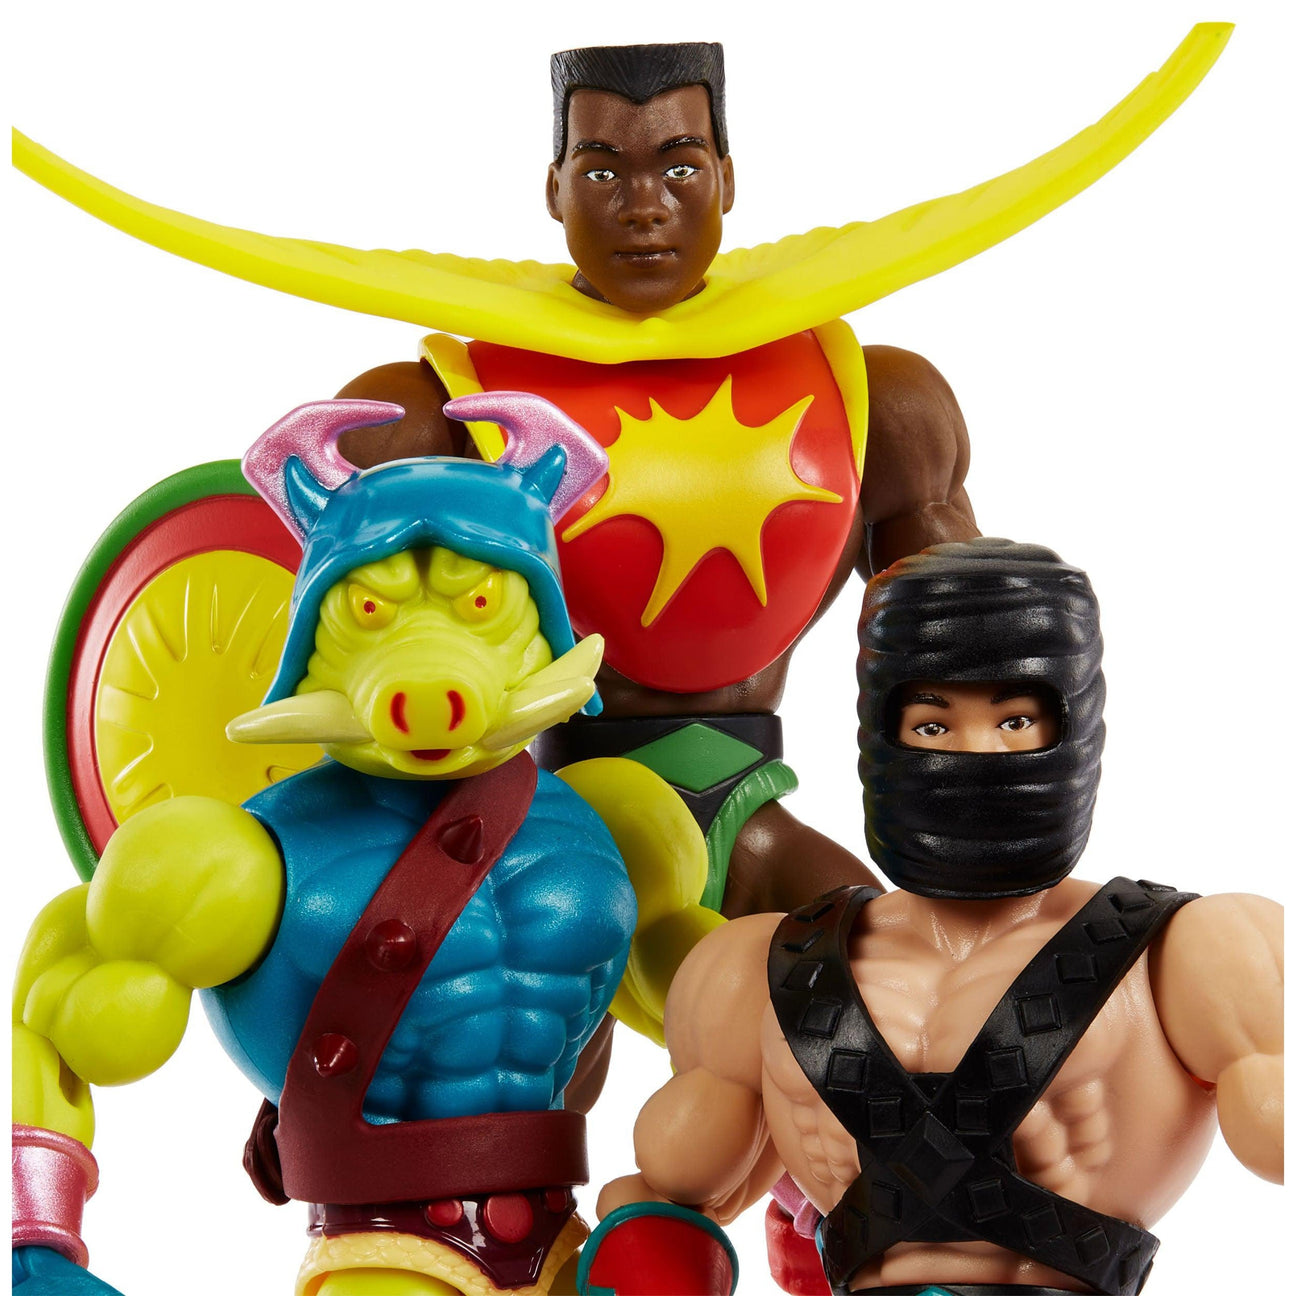 Masters of the Universe Origins: Rulers of the Sun 3-Pack-Actionfiguren-Mattel-Mighty Underground